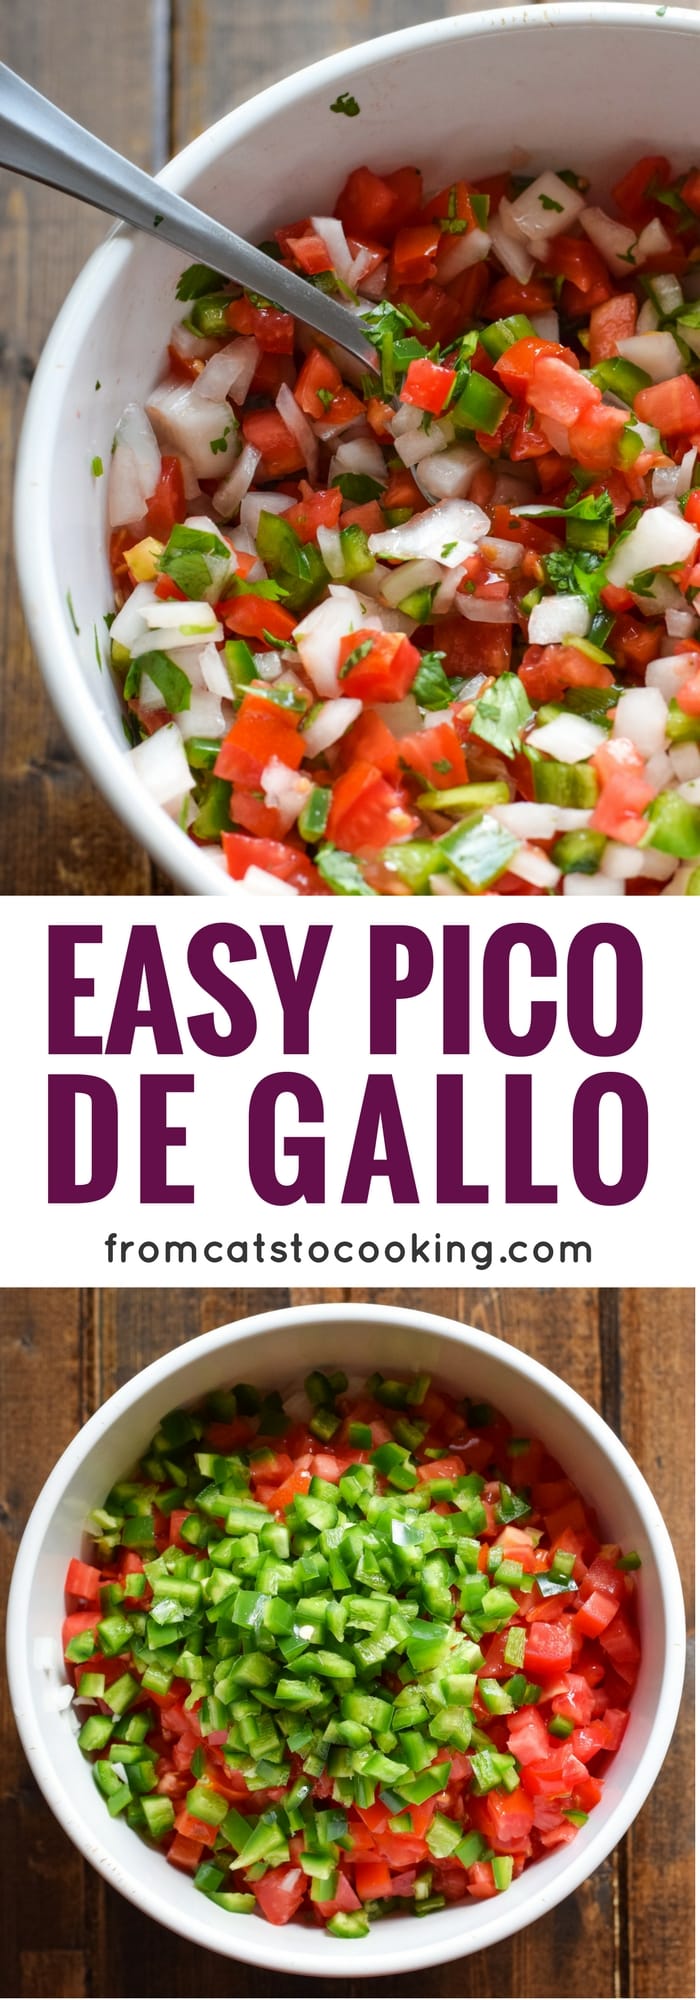 This fresh pico de gallo salsa is made with onions, jalapeños, roma tomatoes, chopped cilantro and freshly squeezed lime juice for some added brightness. Perfect as a topping on your favorite tacos or to eat as a snack with some tortilla chips!(gluten free, dairy free, paleo, vegetarian, vegan)